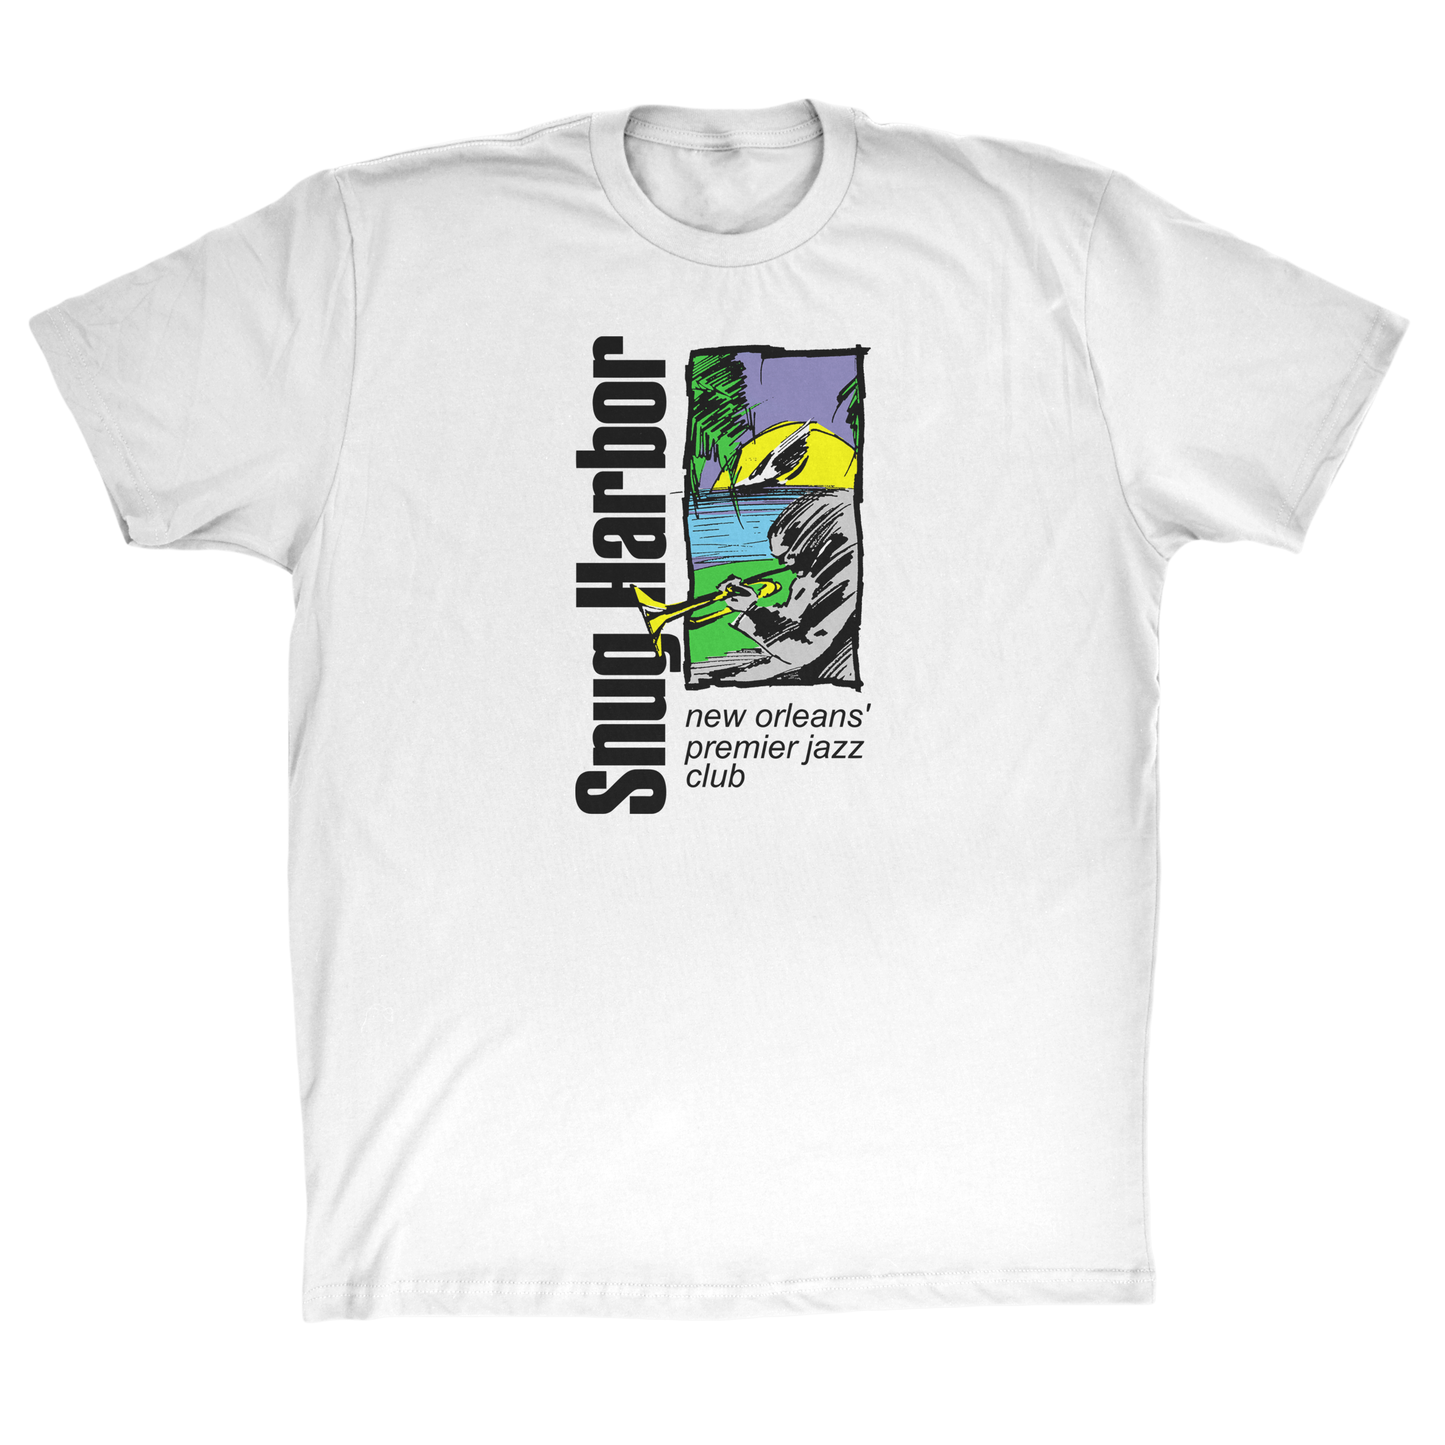 100% cotton, white t-shirt with colorful print of Snug Harbor Jazz Bistro, New Orlean's premier jazz club